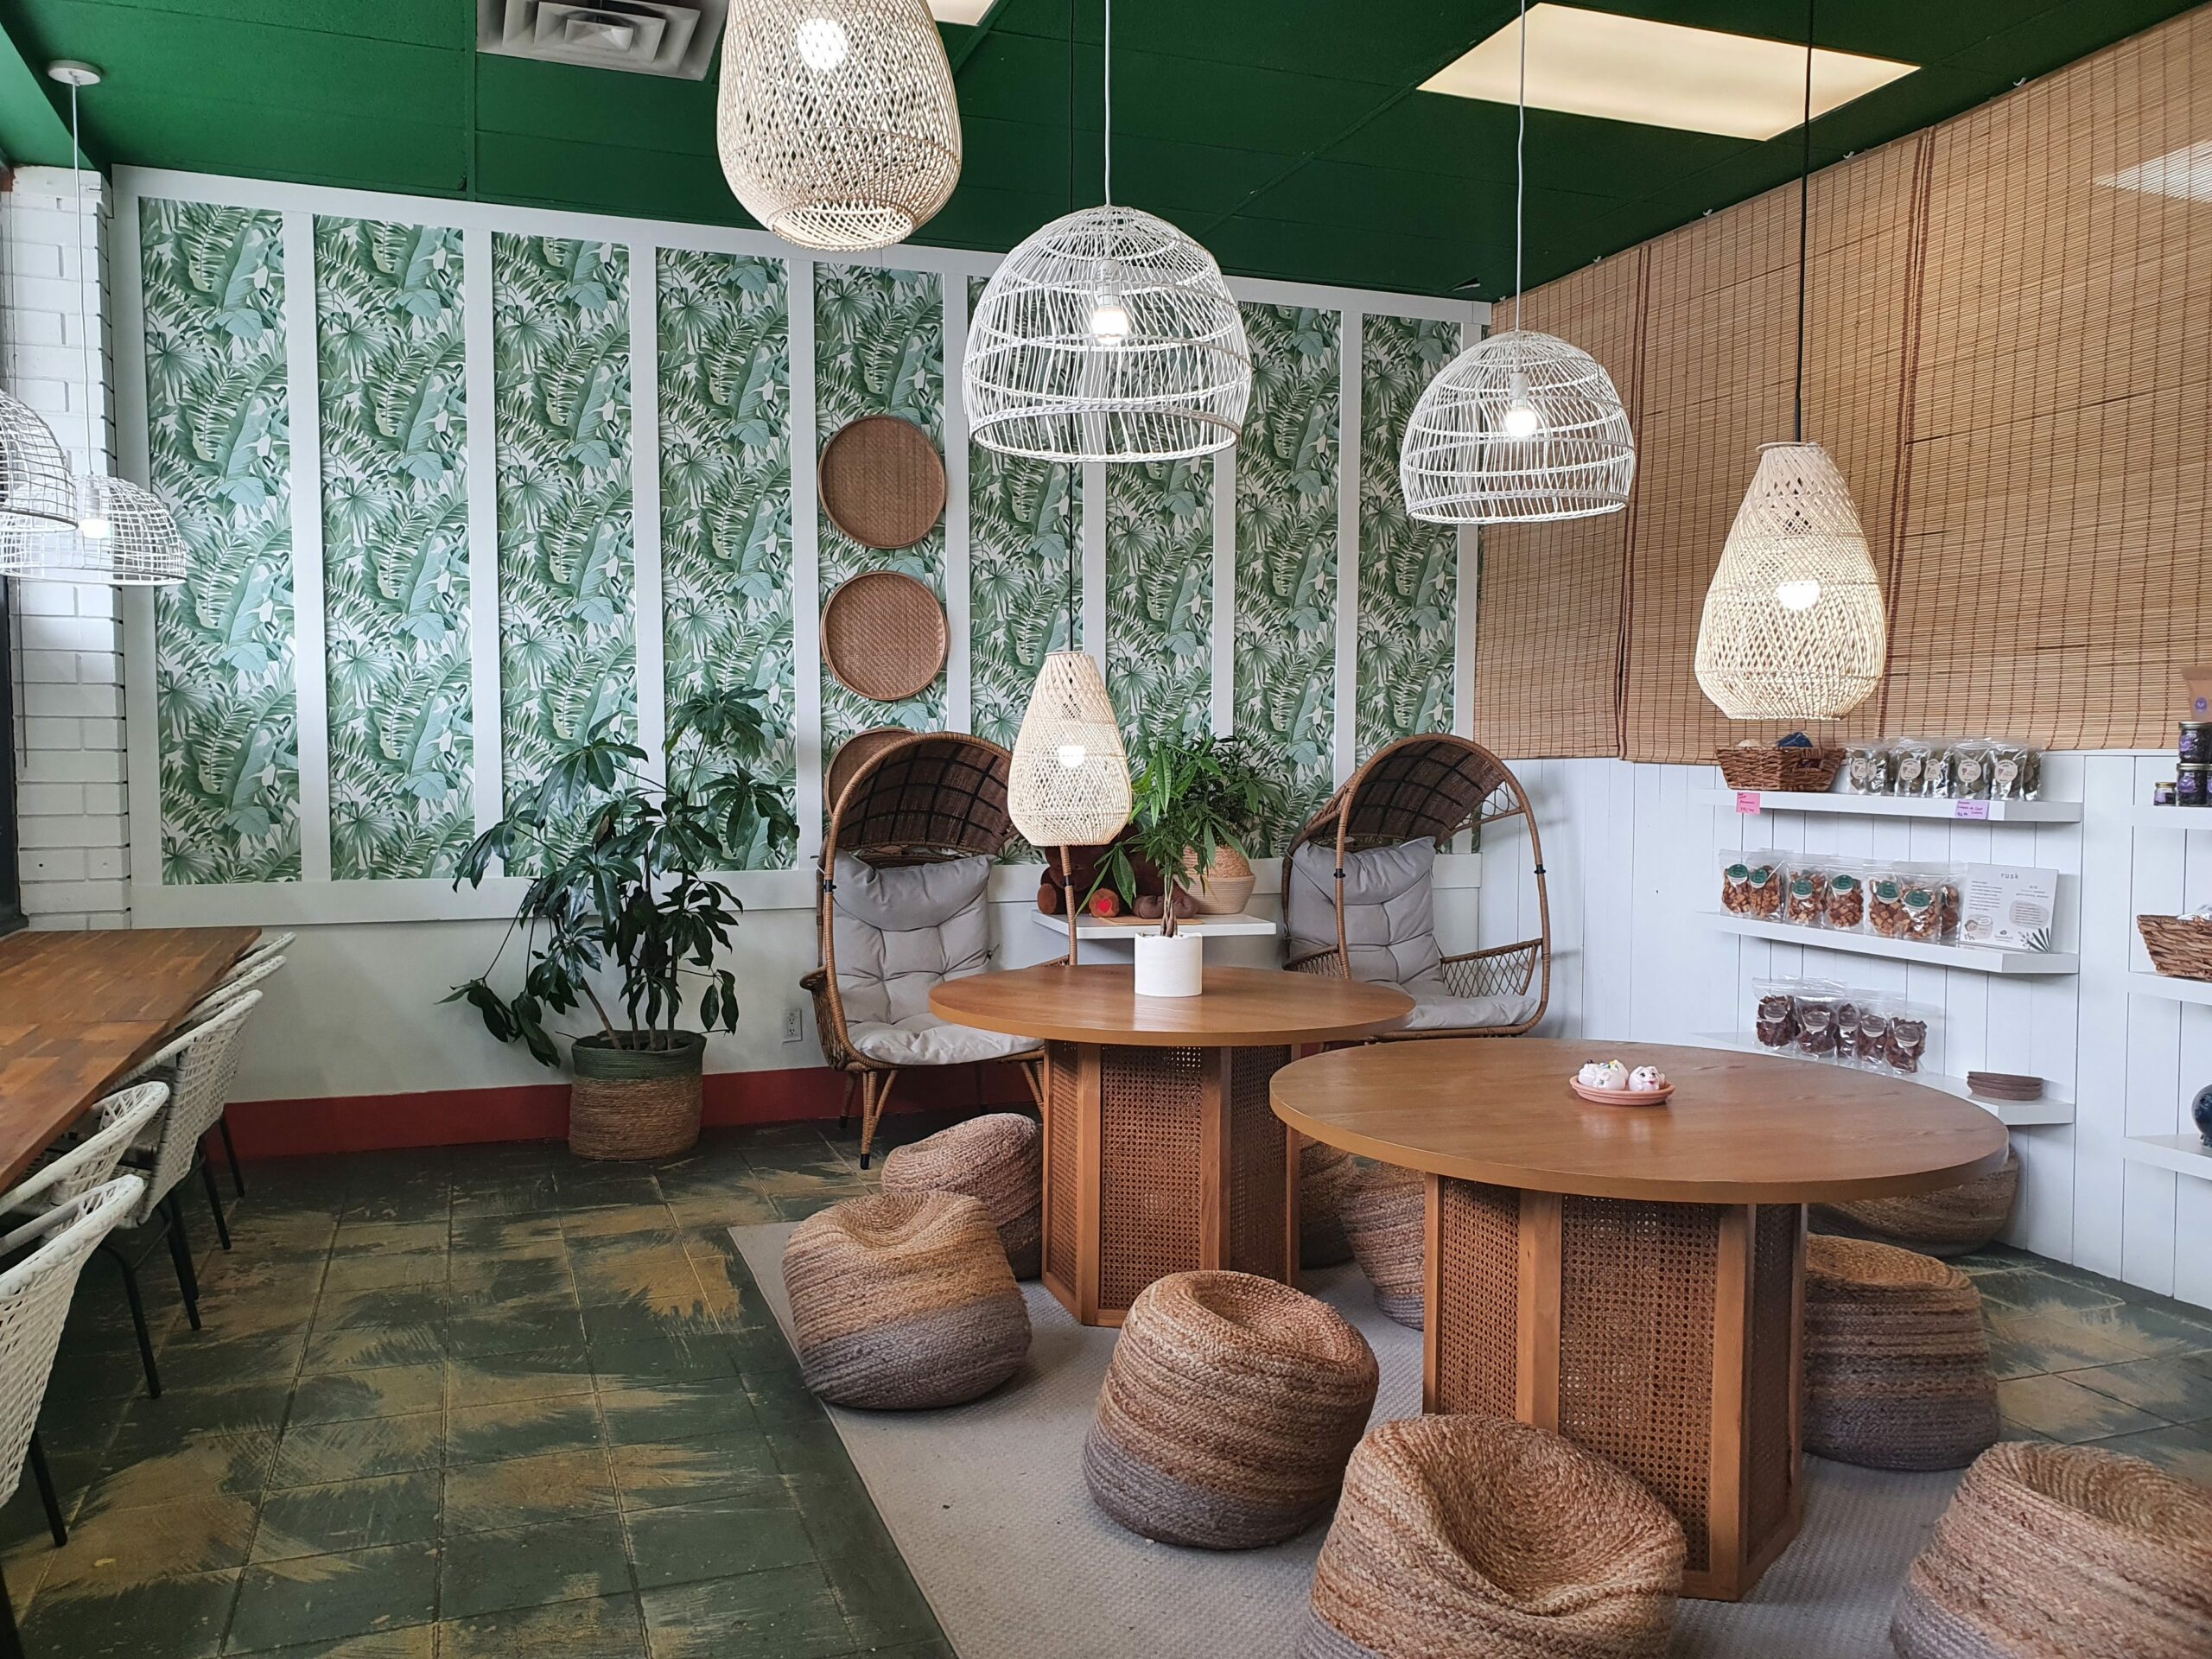 Kanadell’s new storefront interior, themed with green foliage and wick furniture